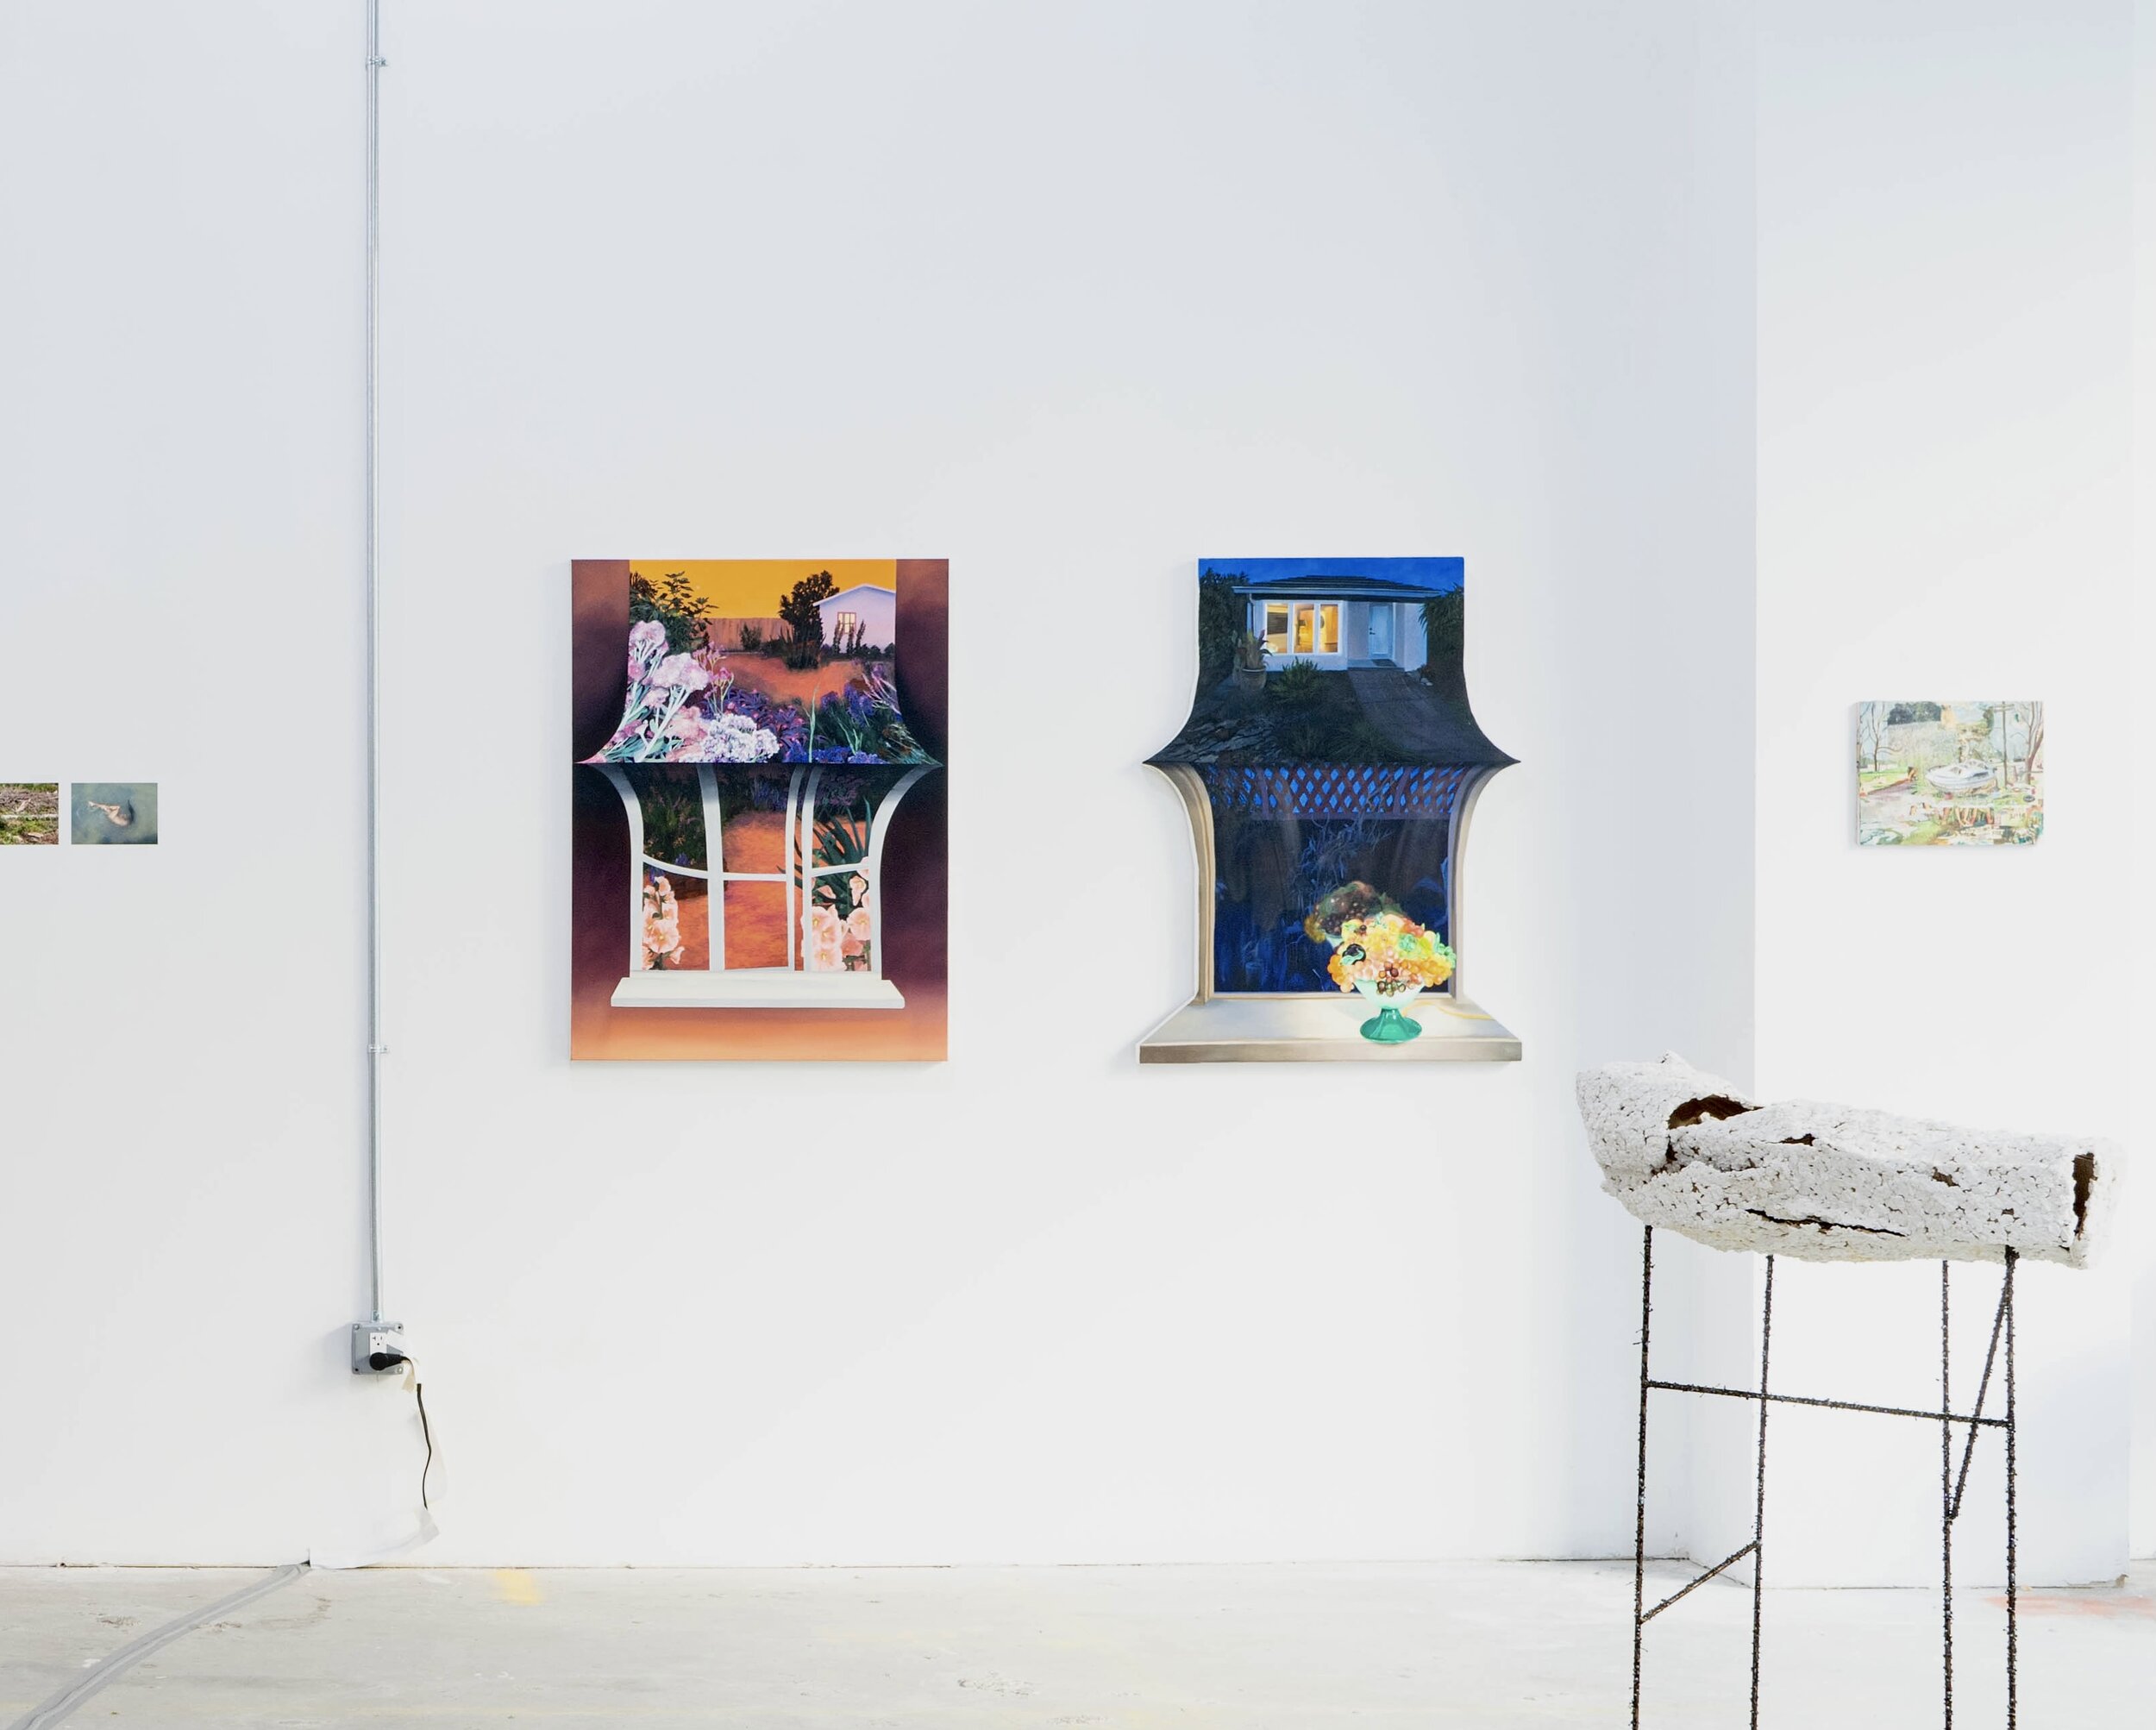  Installation View, “The (better late than never) Columbia Summer Show”, ChaShaMa 